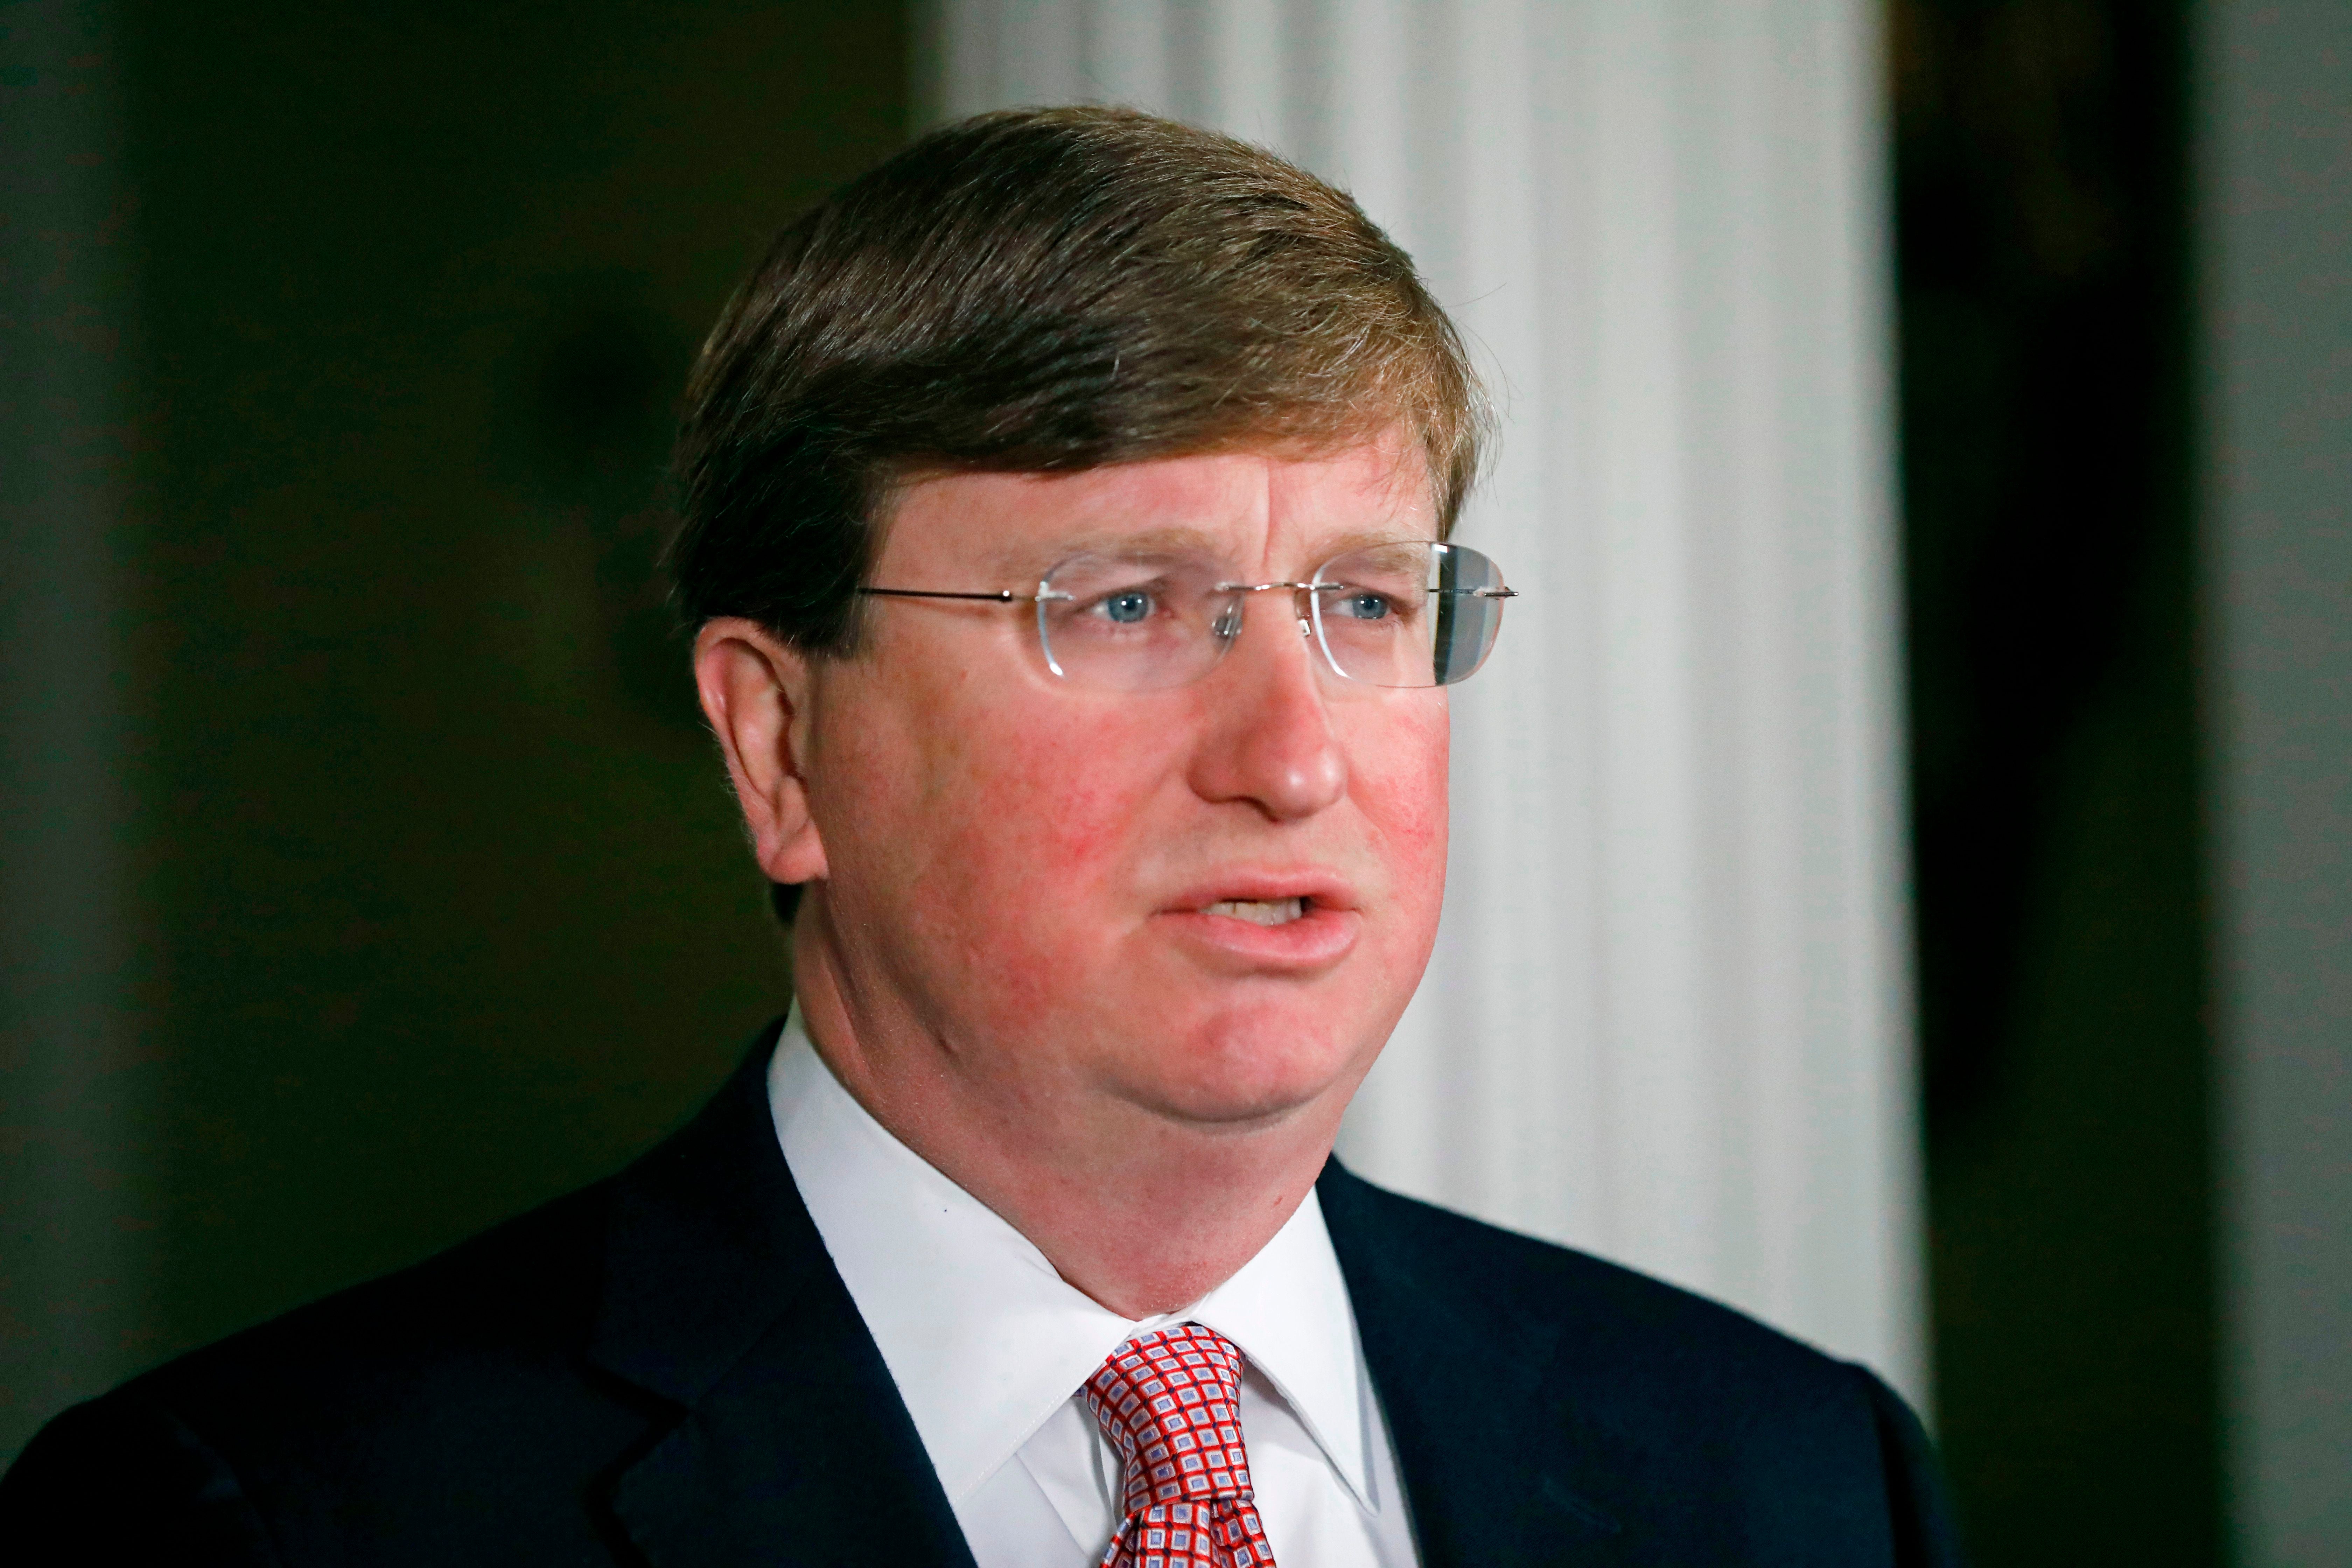 Mississippi Governor Tate Reeves speaks at a news conference